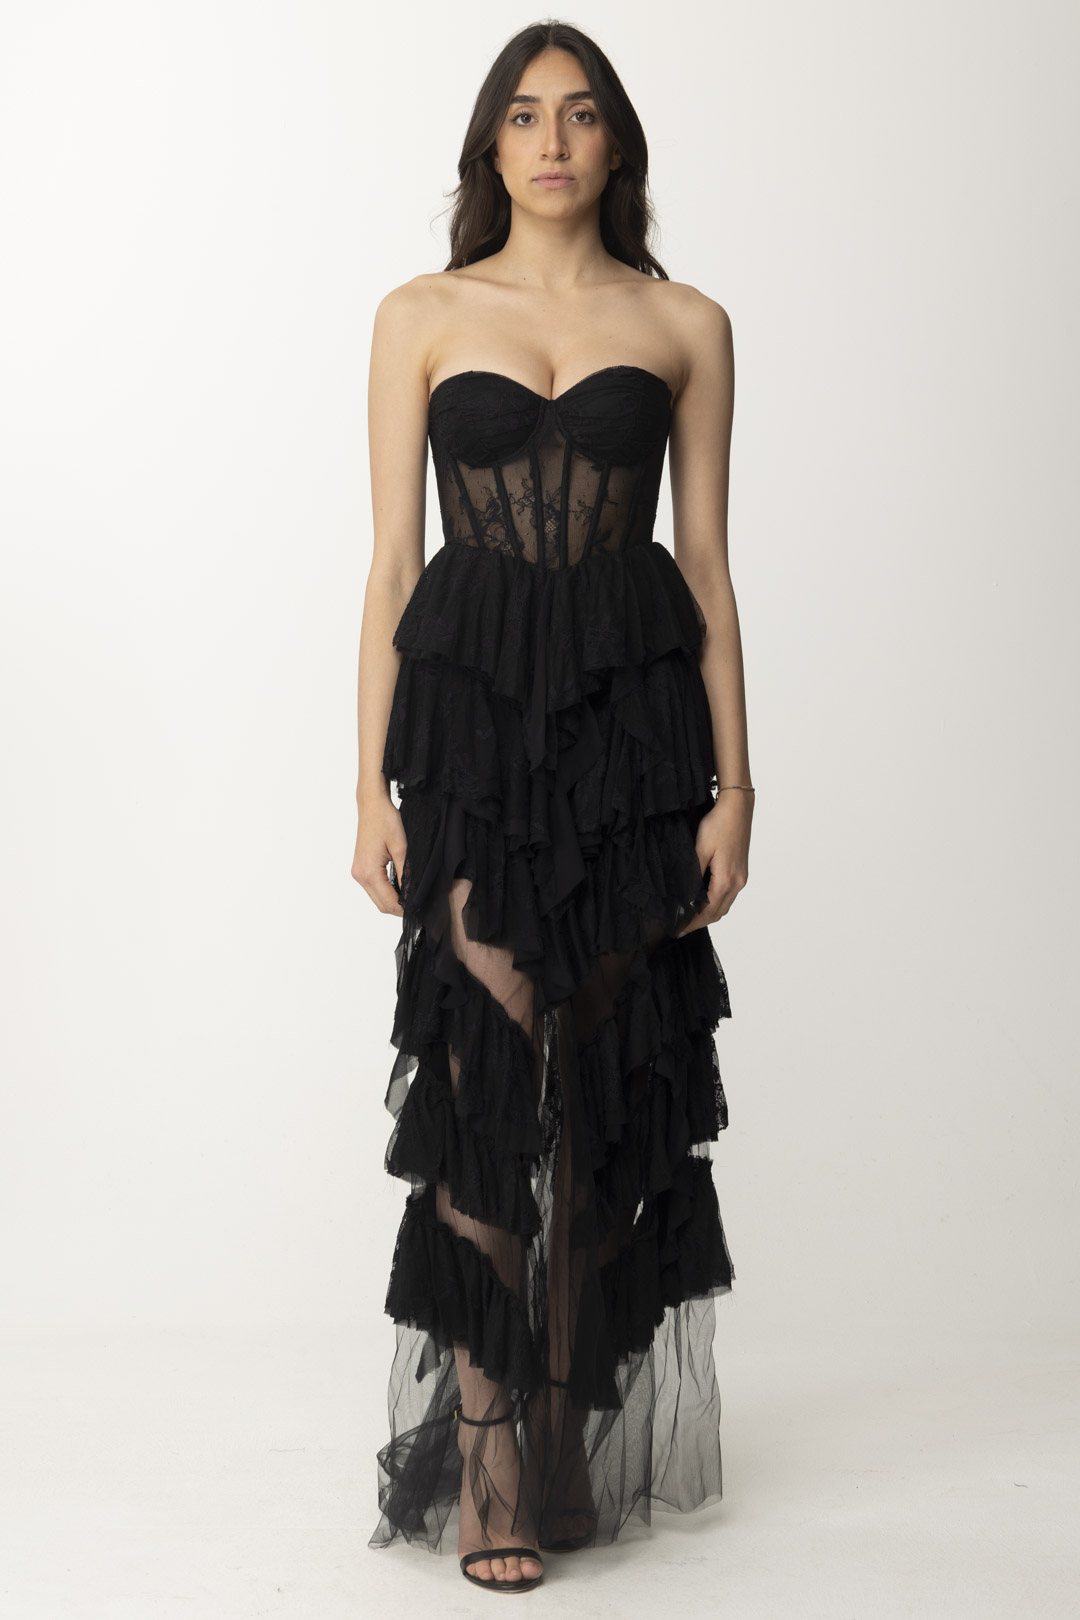 Preview: Aniye By Long Dress with Lace Ruffles Lacy Black